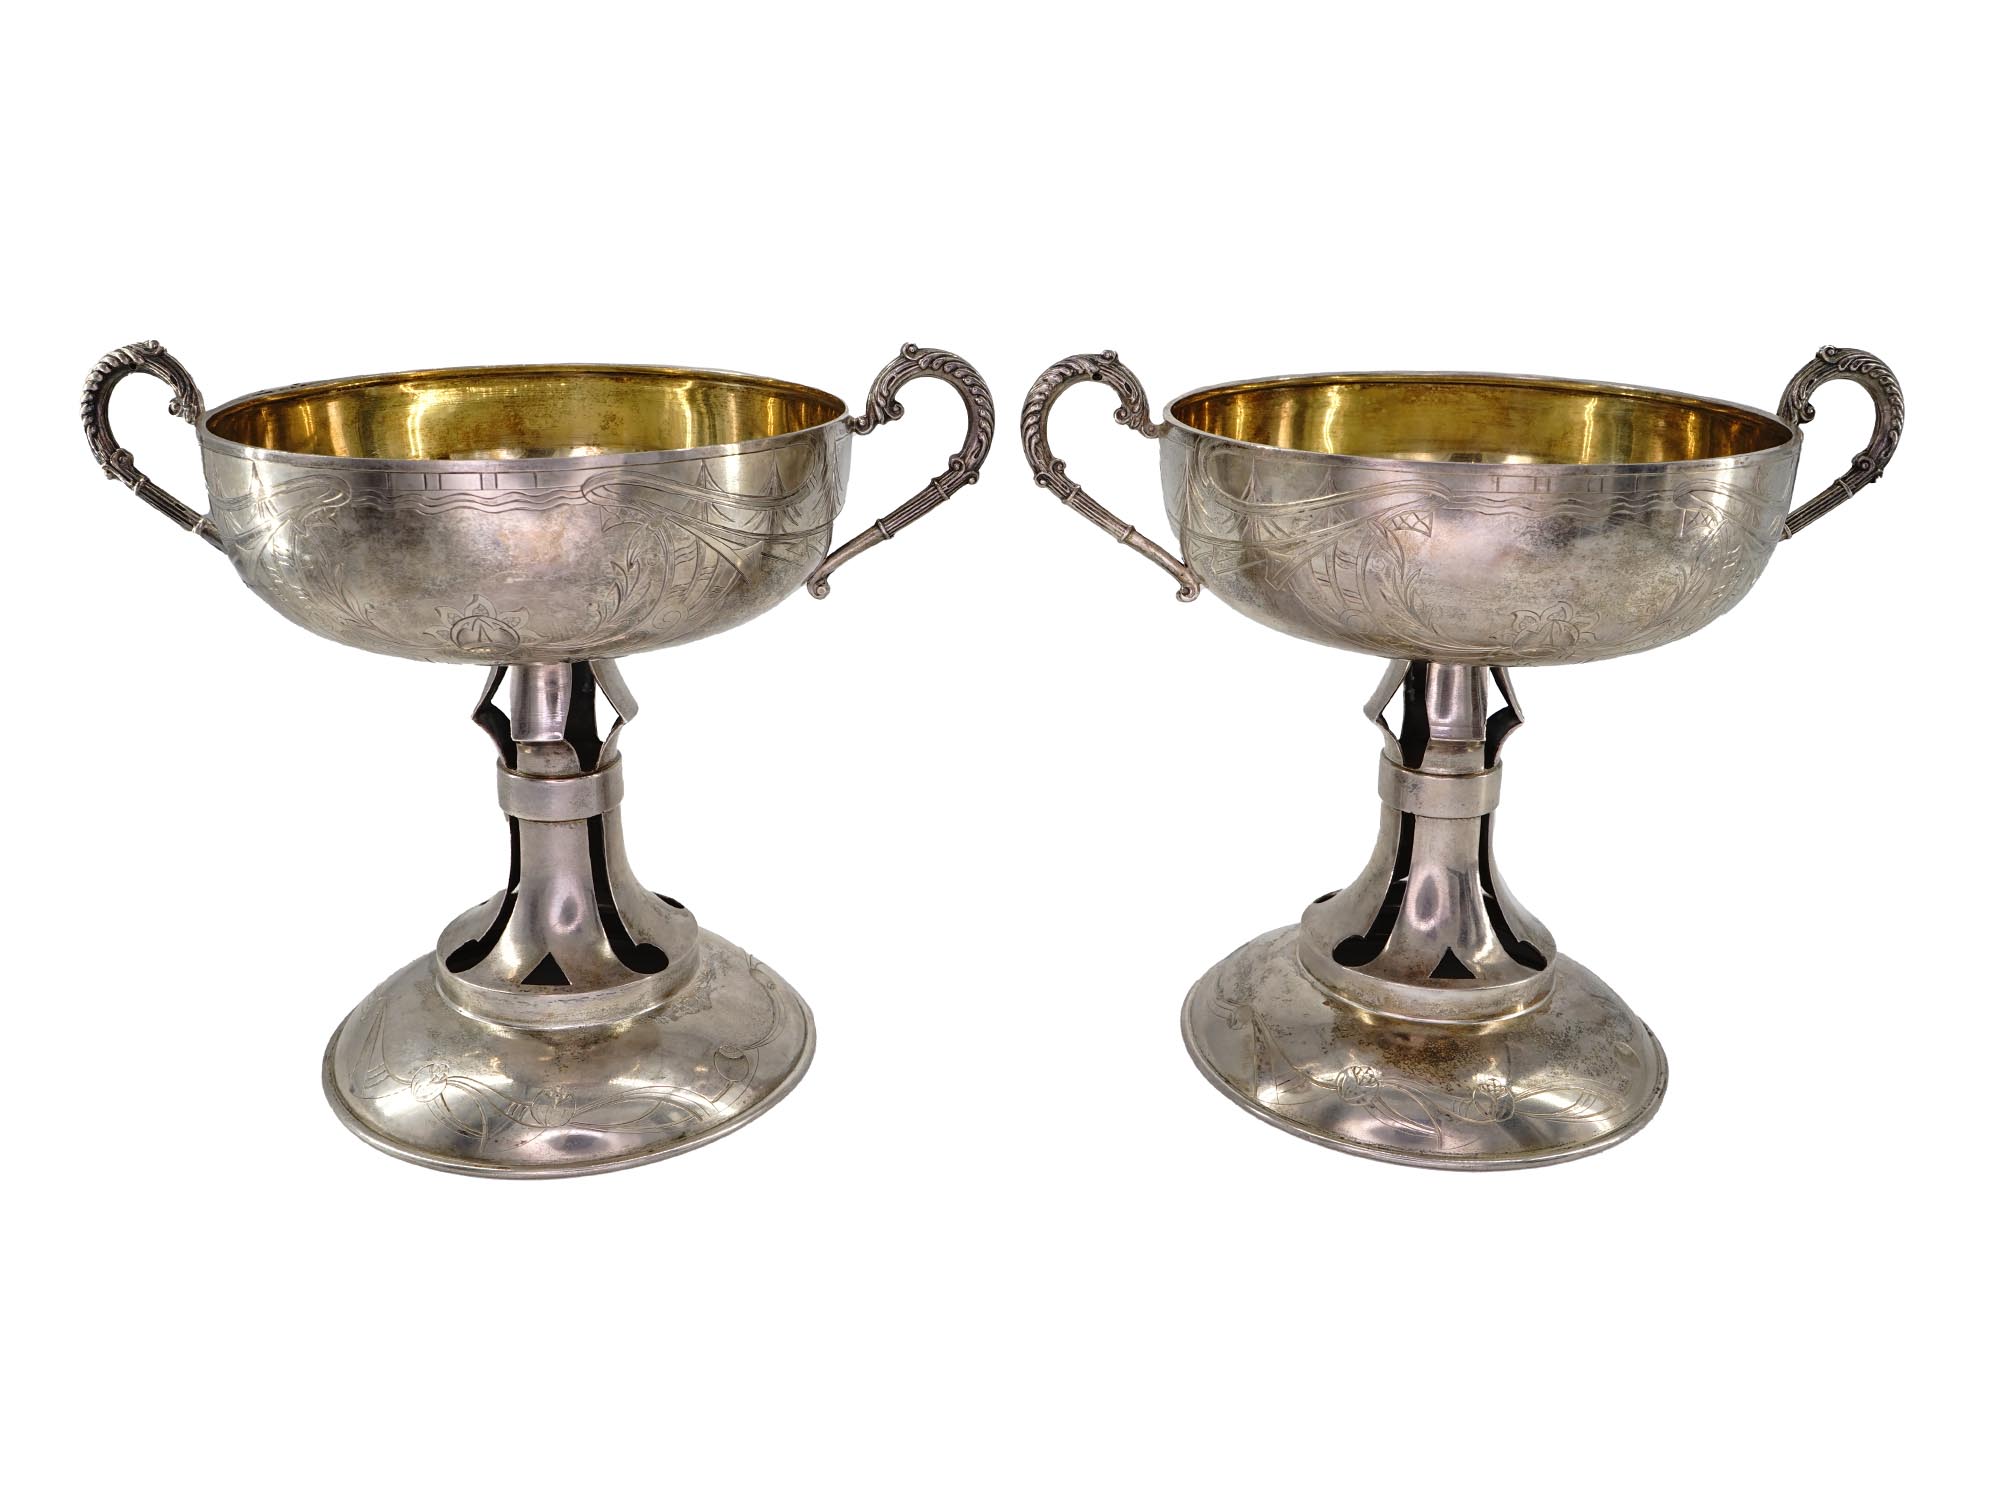 ANTIQUE RUSSIAN GILT SILVER FOOTED CANDY BOWLS PIC-0